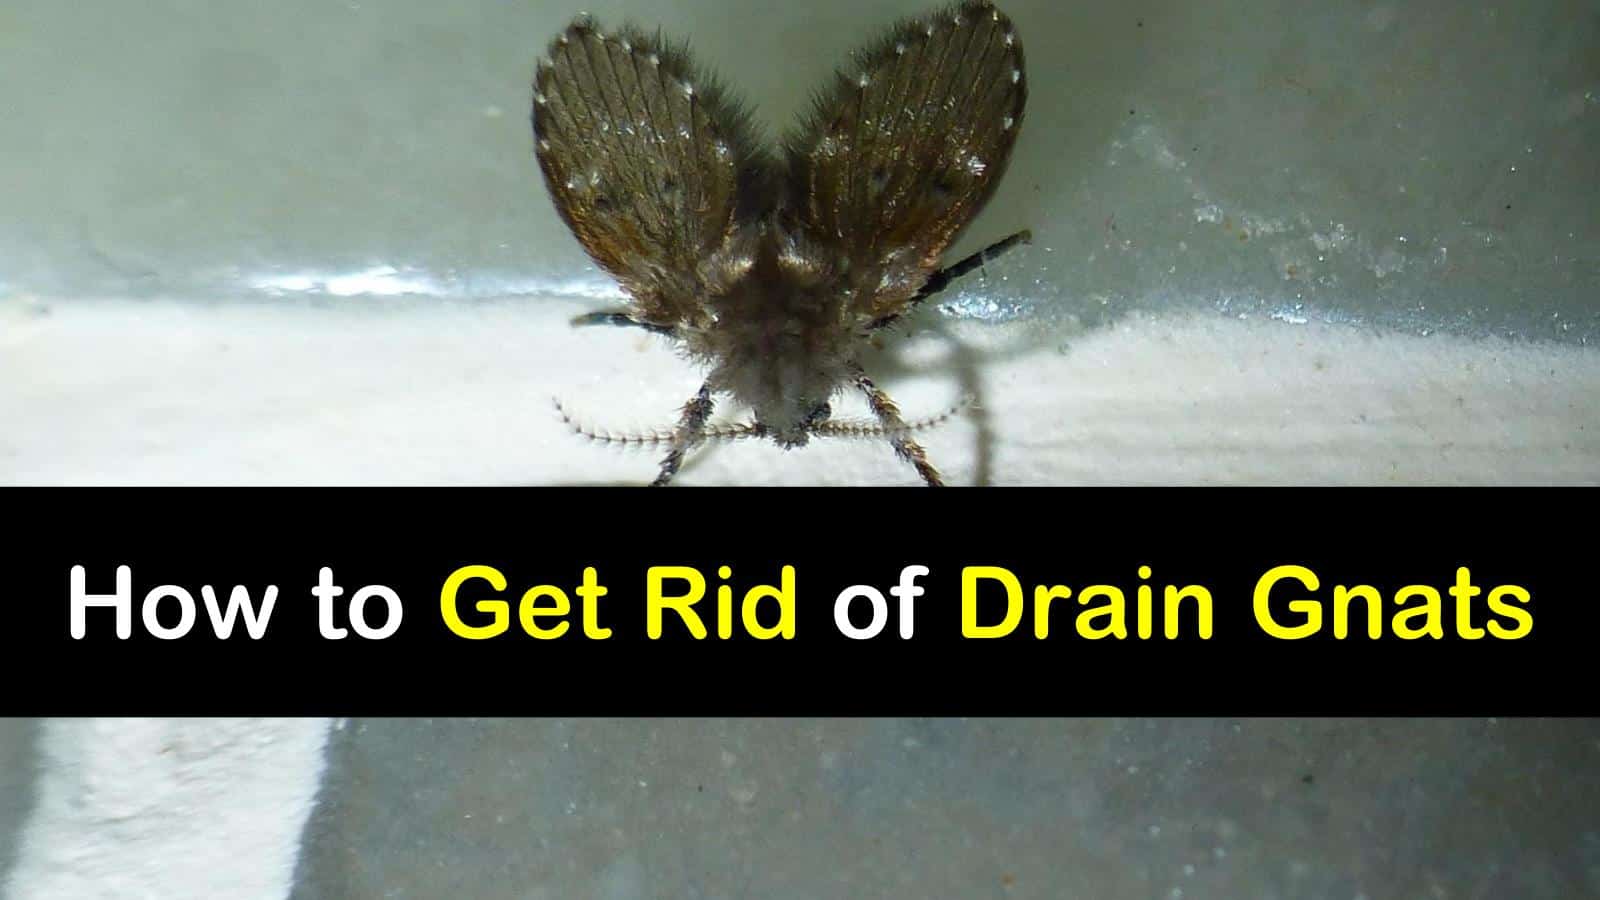 4 Amazingly Simply Ways To Get Rid Of Drain Gnats